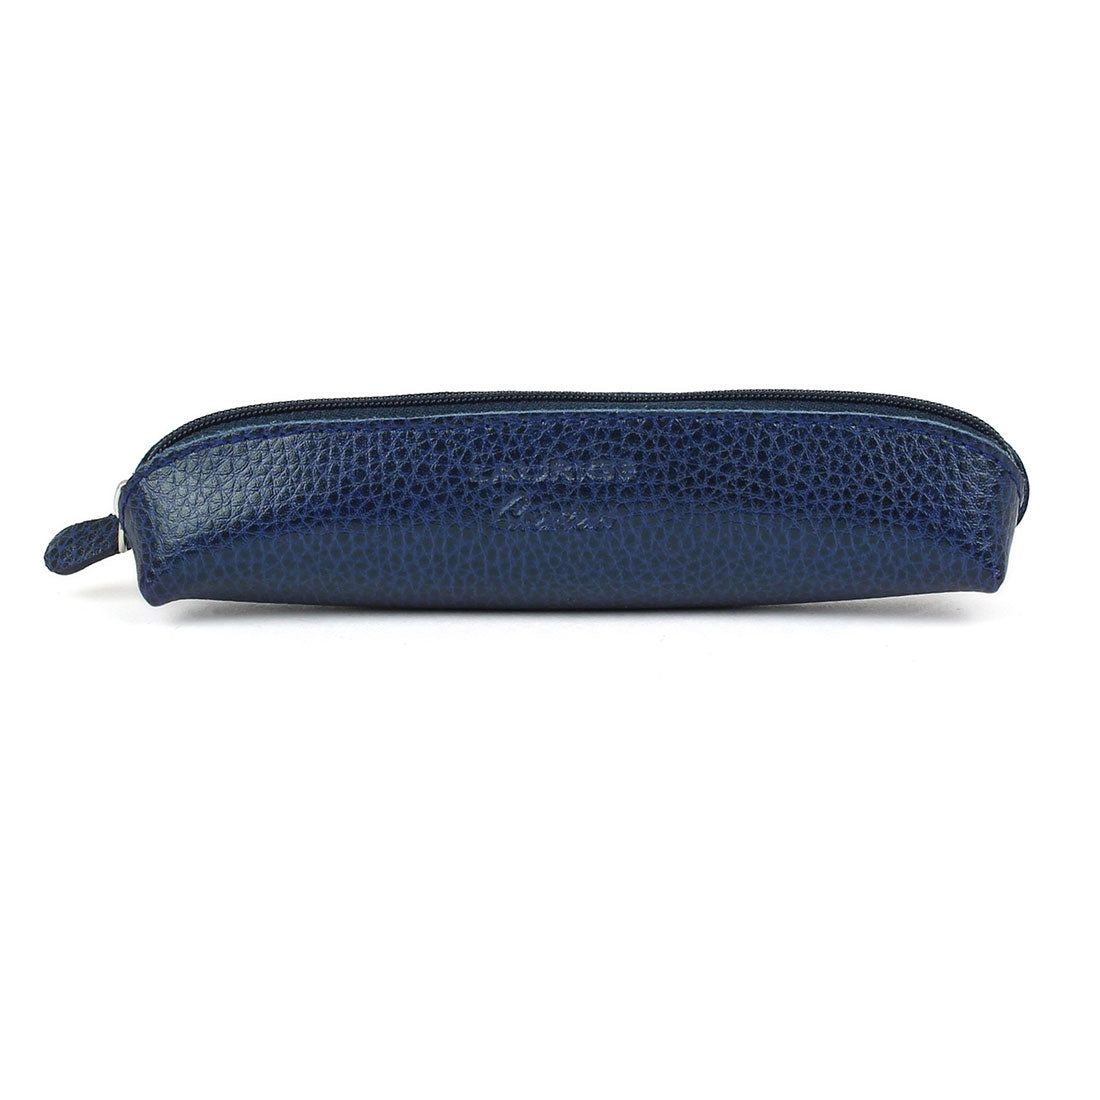 Small Pen Holder - Navy#color_laurige-navy